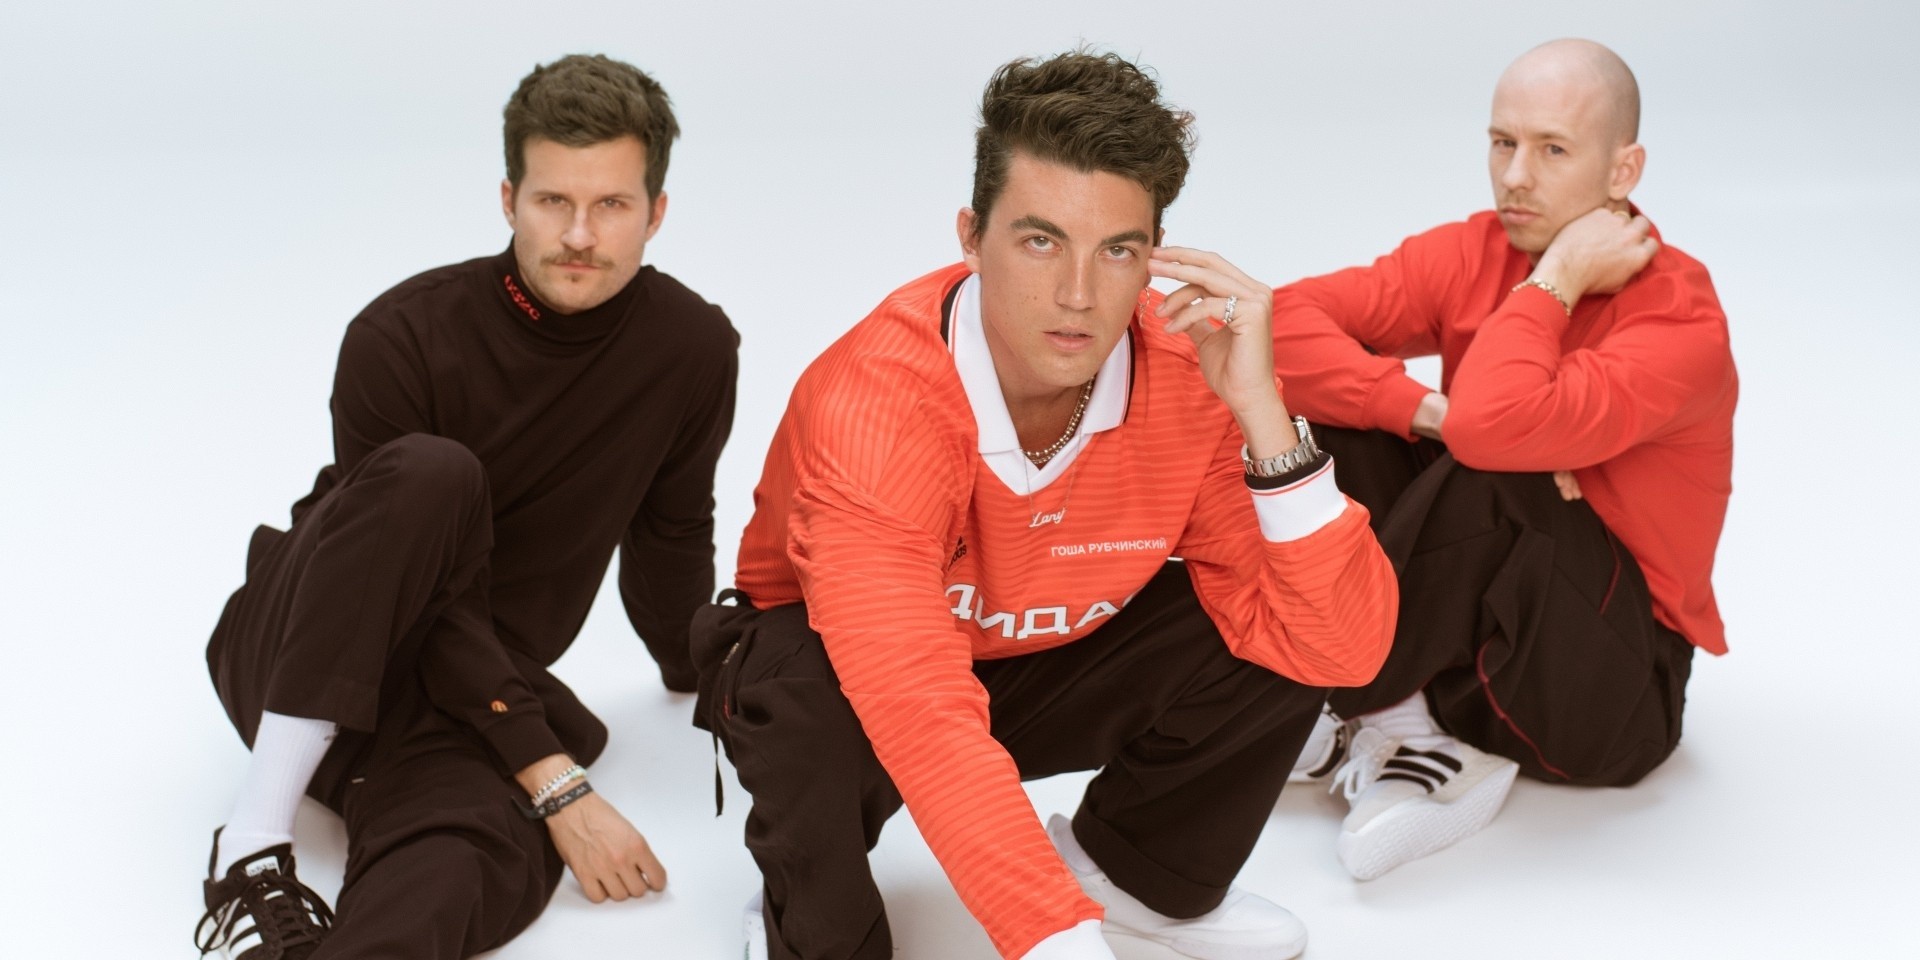 LANY's second album Malibu Nights is out now